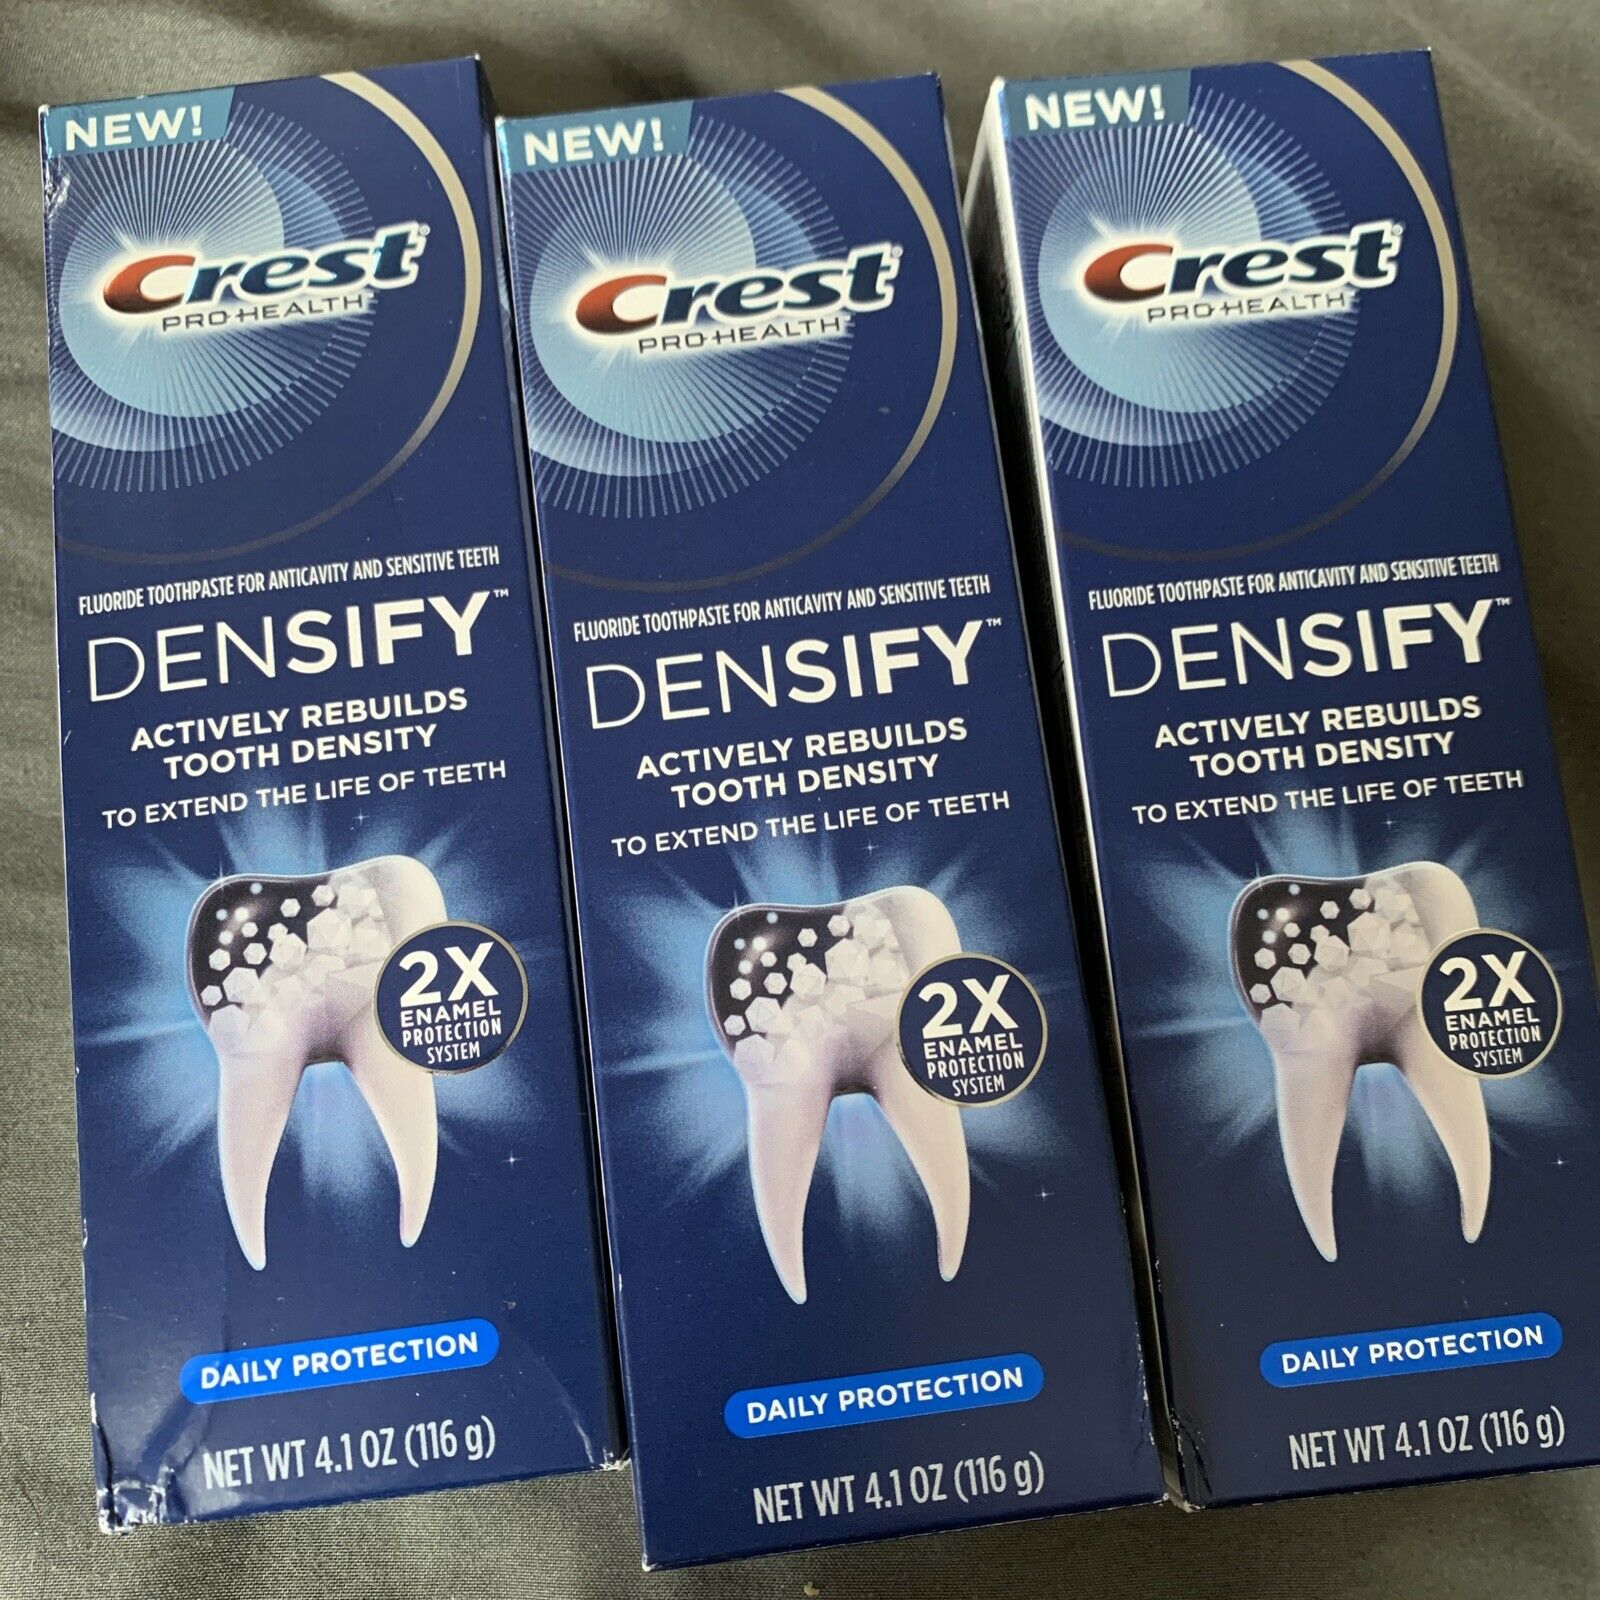 Lot of 3 Crest Pro Health DENSIFY Daily Protection Fluoride Toothpaste 4.1oz.